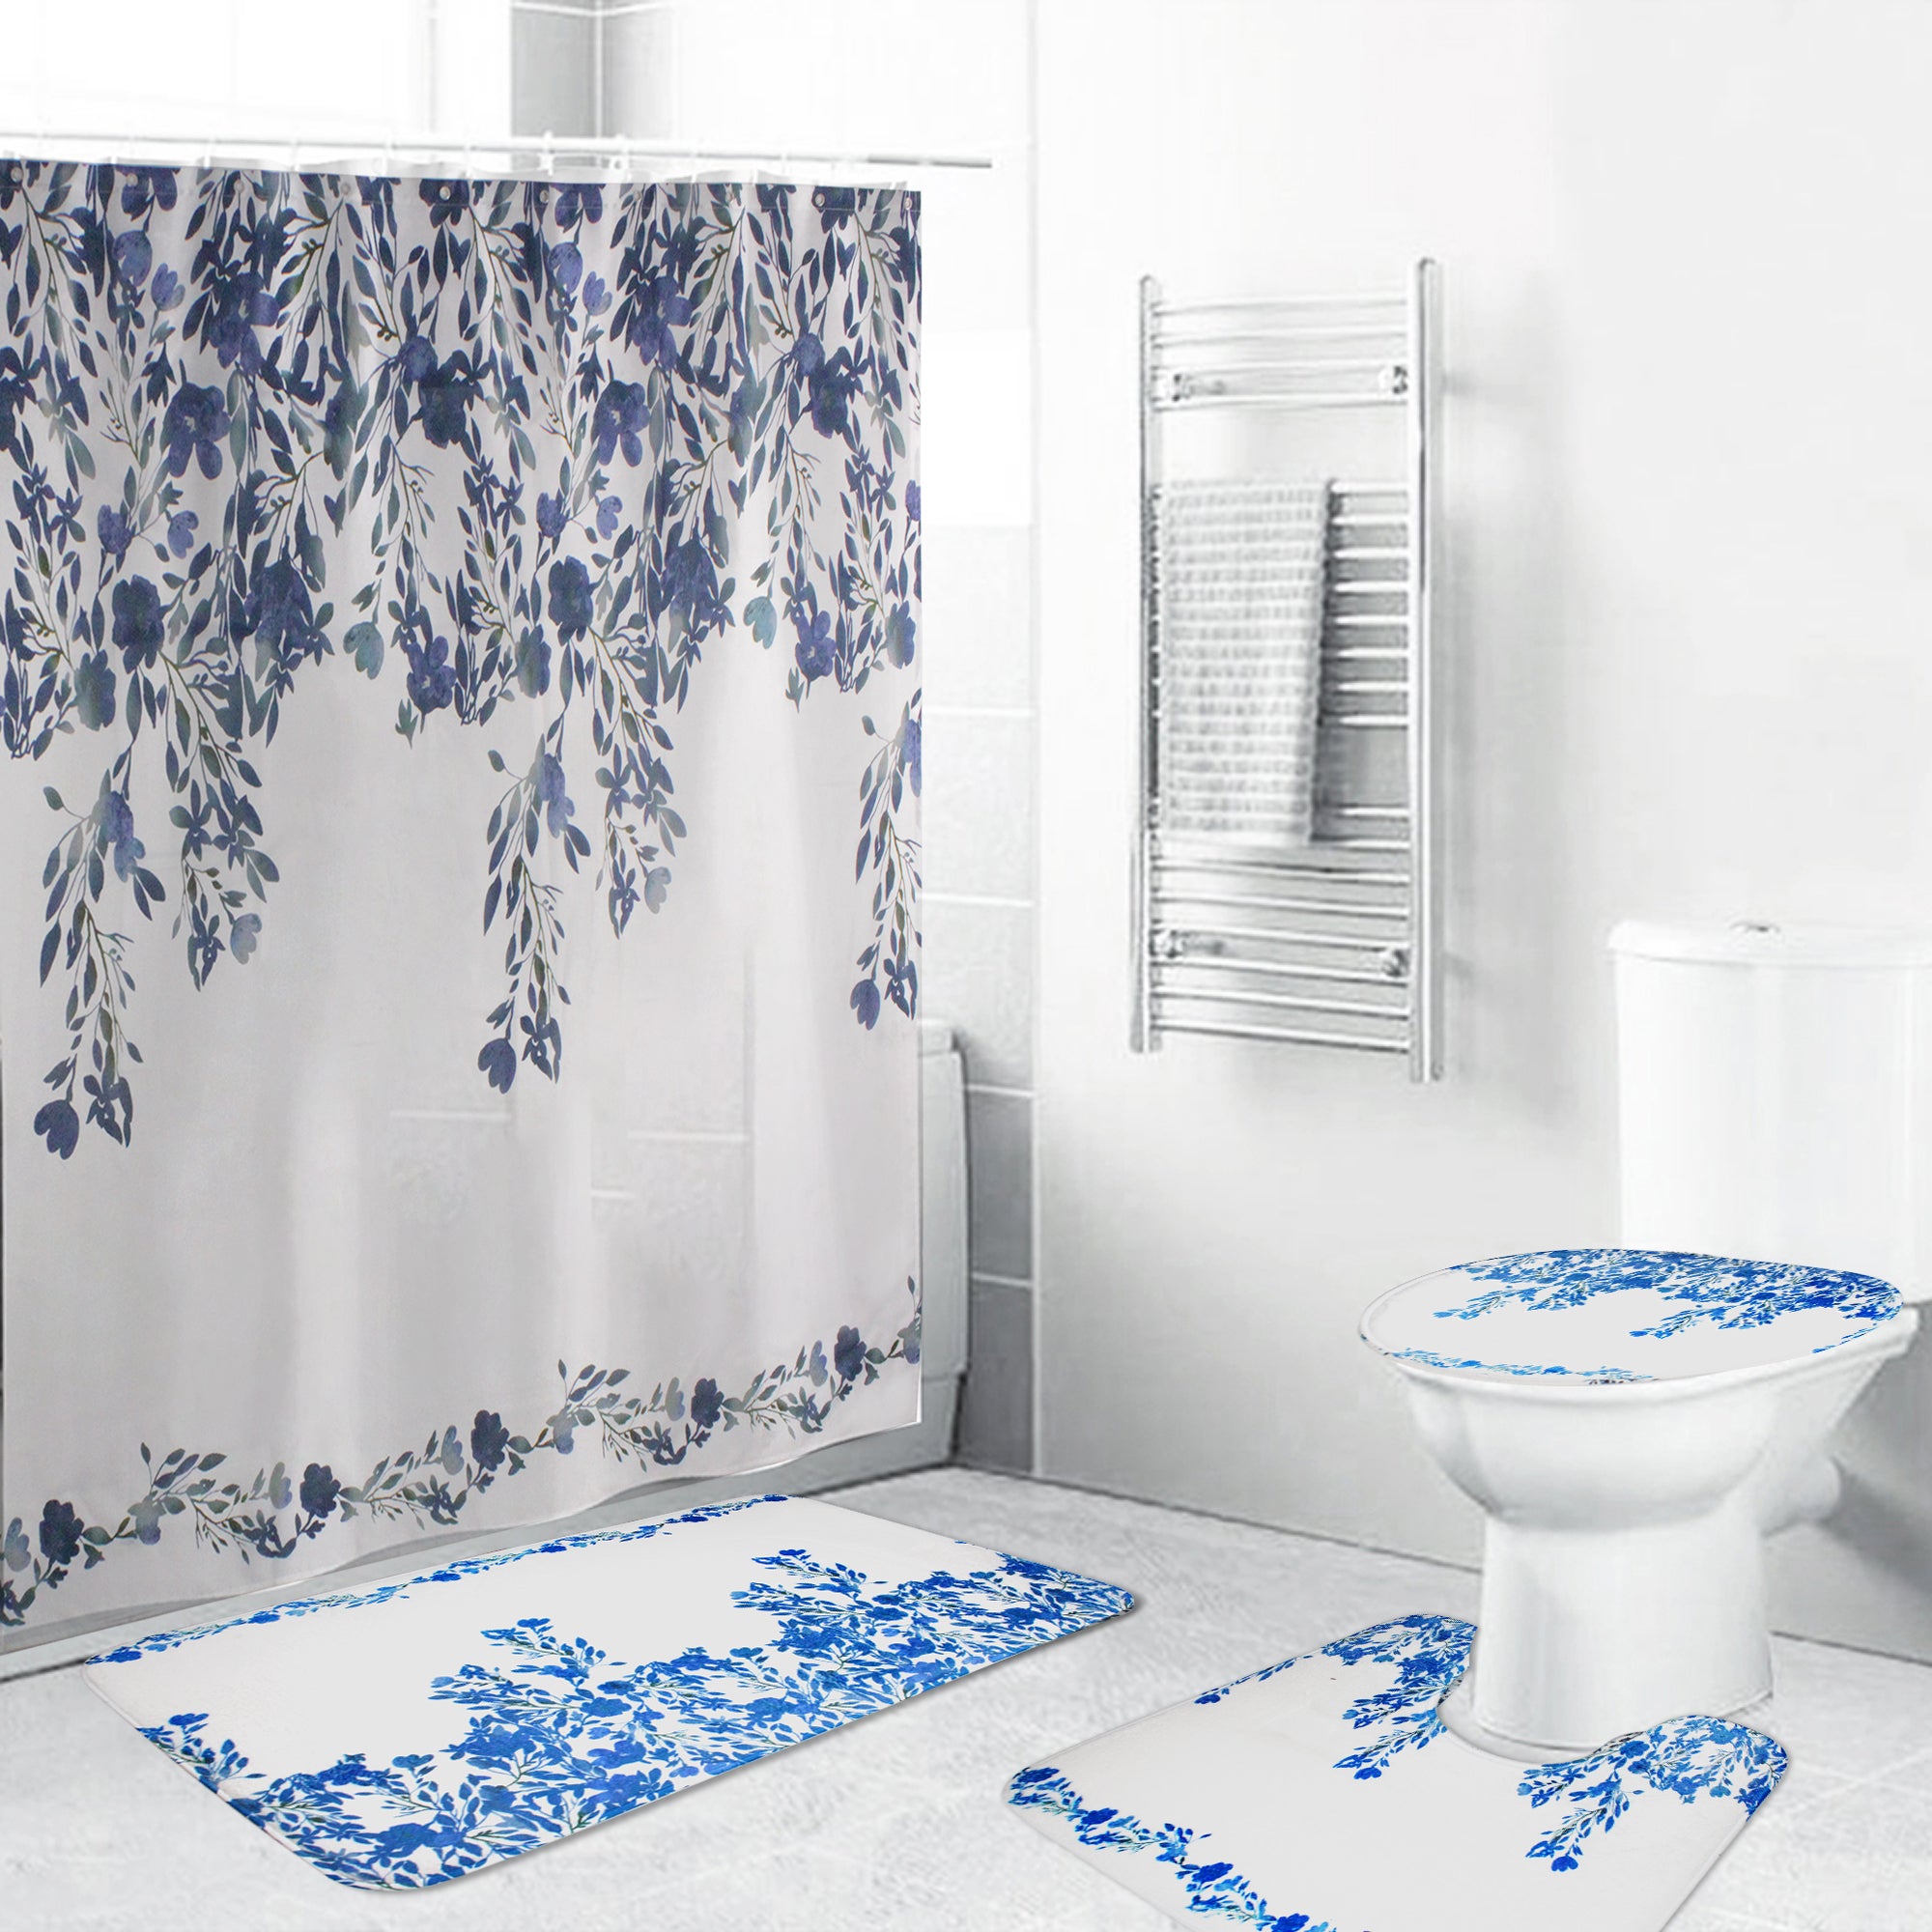 LMA 180cm Floral Fantasy Fabric Shower Curtain & 3 Piece Toilet Cover & Mat Set - Teal